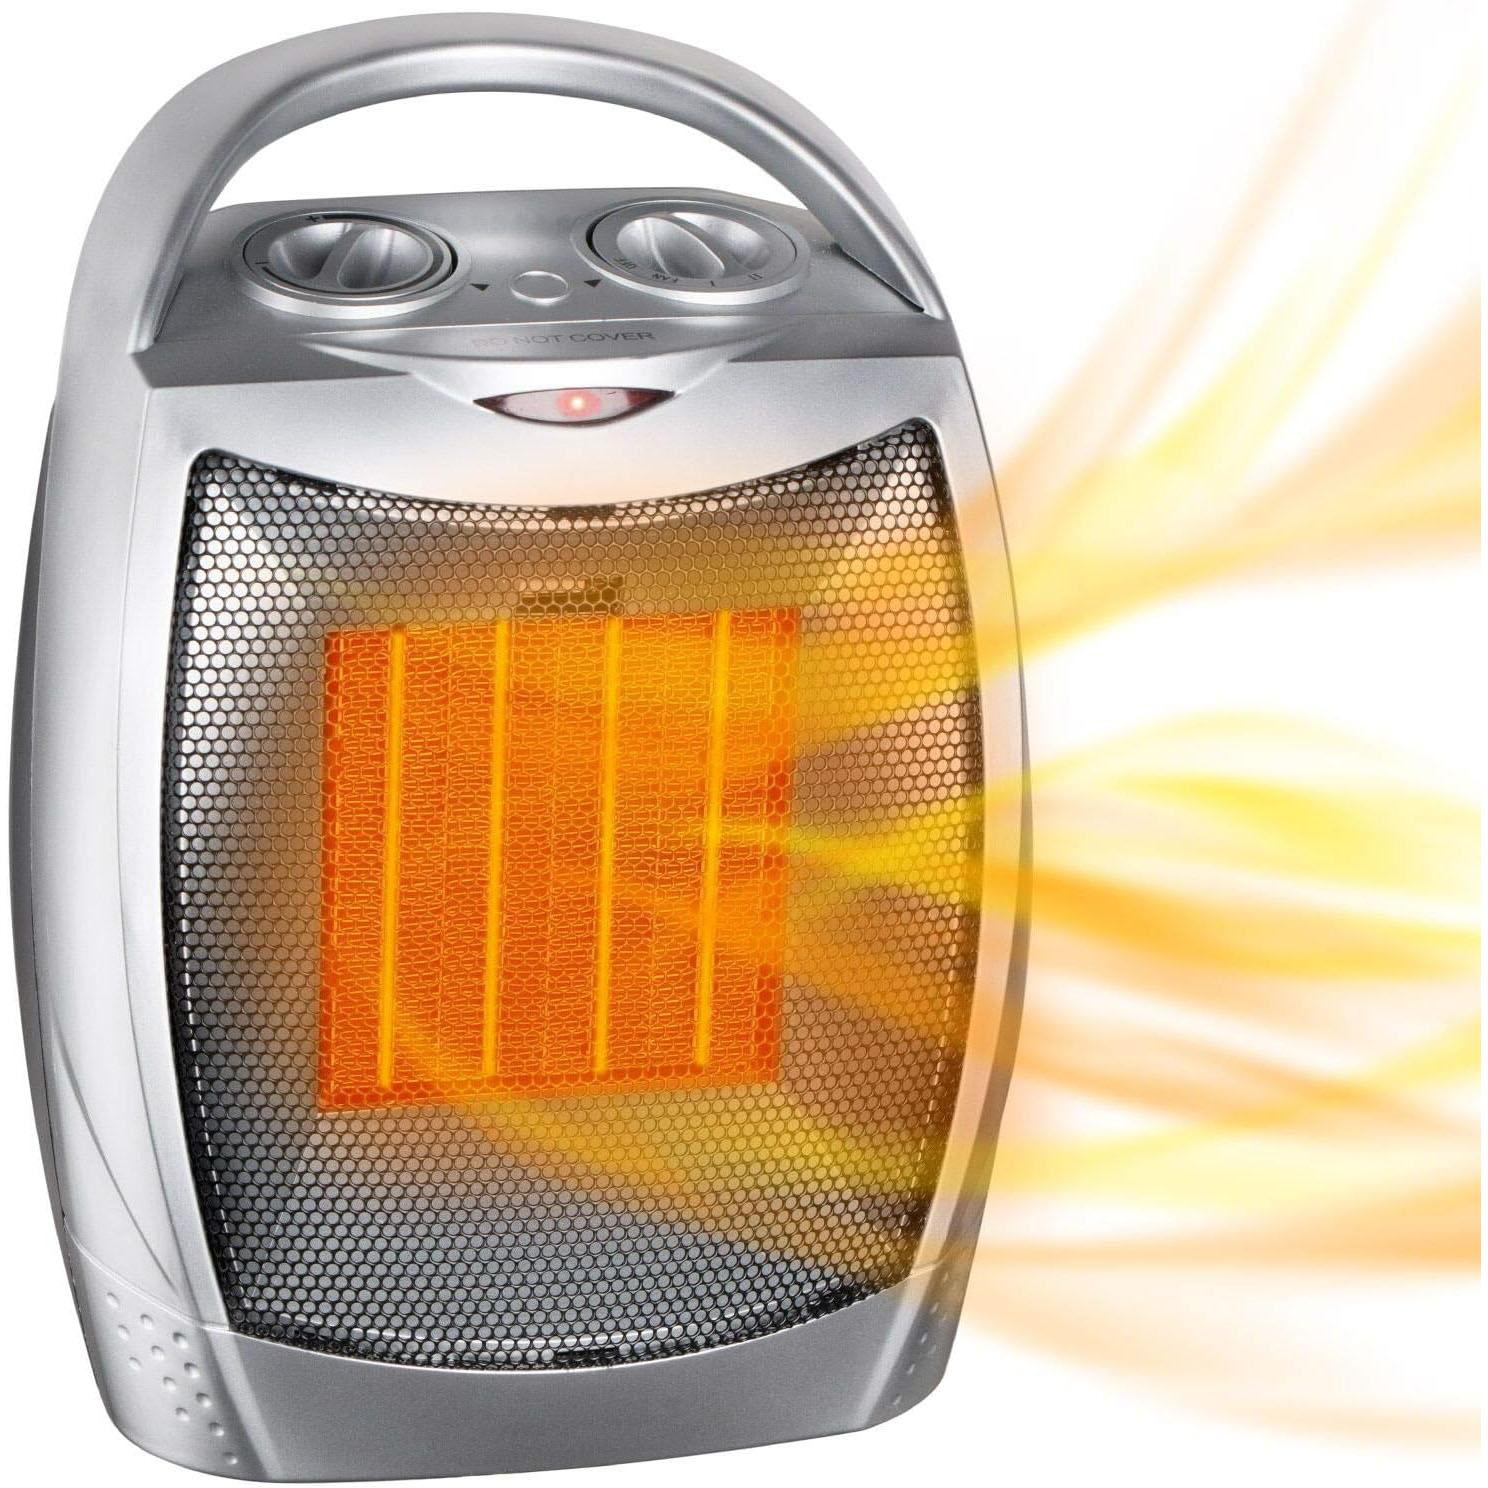 GiveBest 1500W Portable Electric Ceramic Space Heater for $8.99